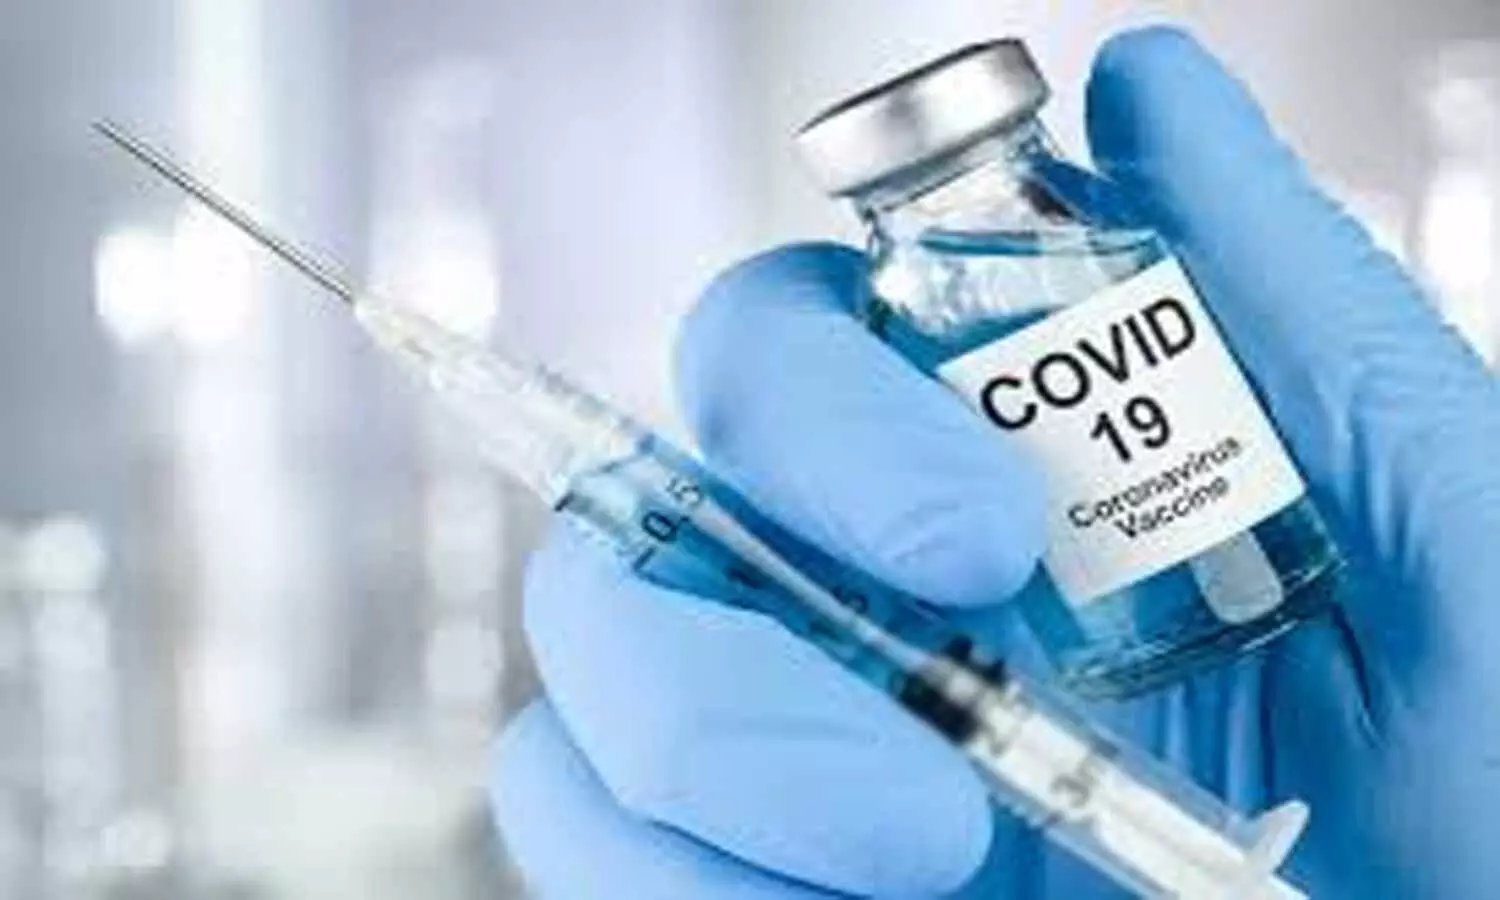 All Covid-19 vaccines to be stored at 2-8 degrees Celsius: Dept of Biotechnology